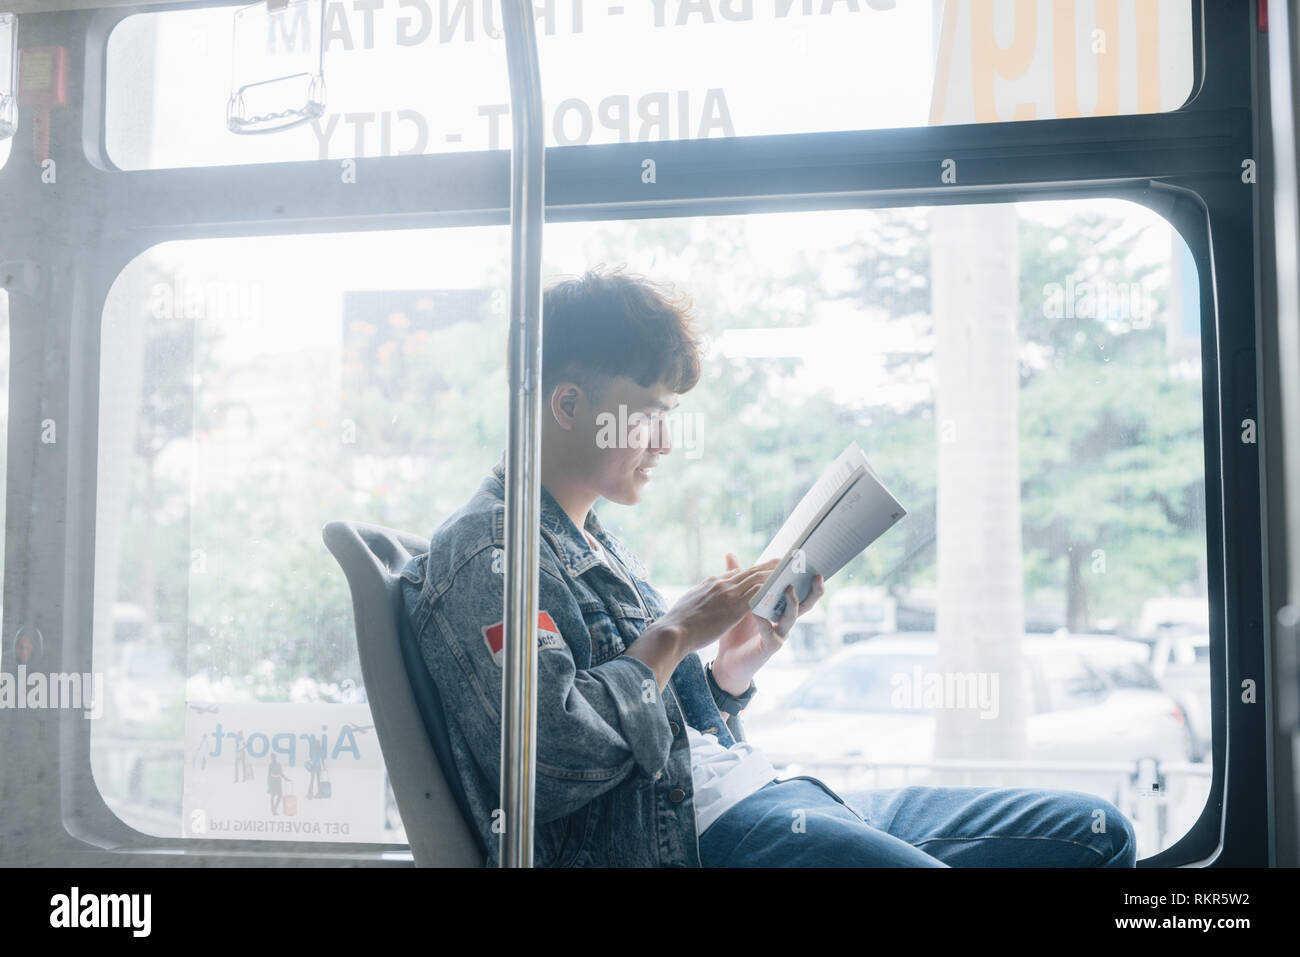 HO CHI MINH CITY, VIETNAM - 22 JULY, 2017: Transport: Transport. People in the bus. He reading book in transport. Stock Photo